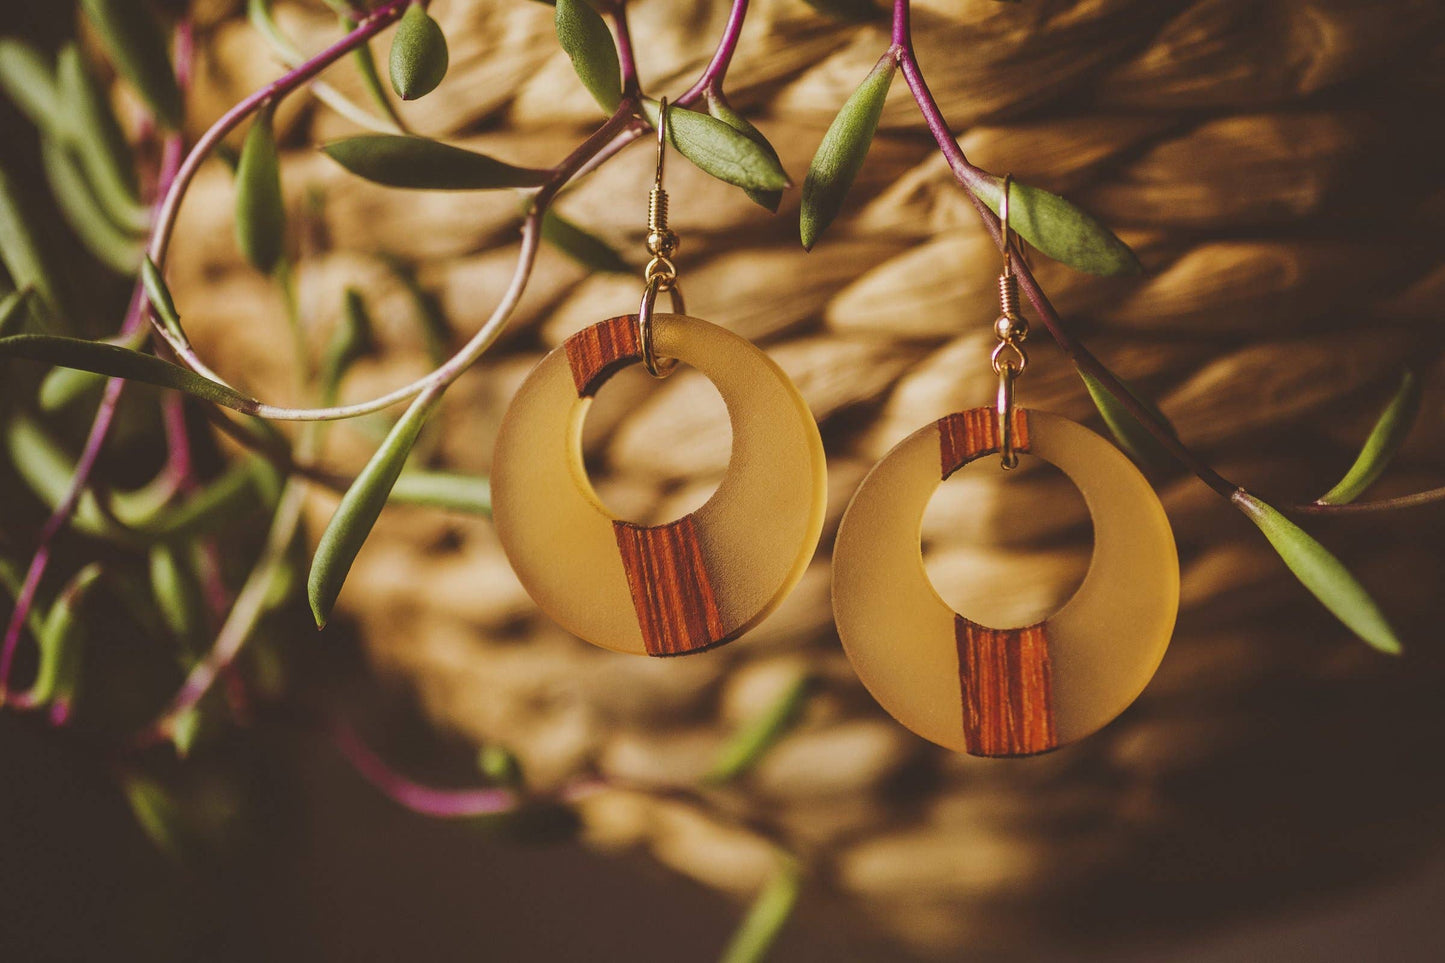 Photo of the “Yellow Daisy Earring” by Wooden Element, with the earrings hanging on a plant.